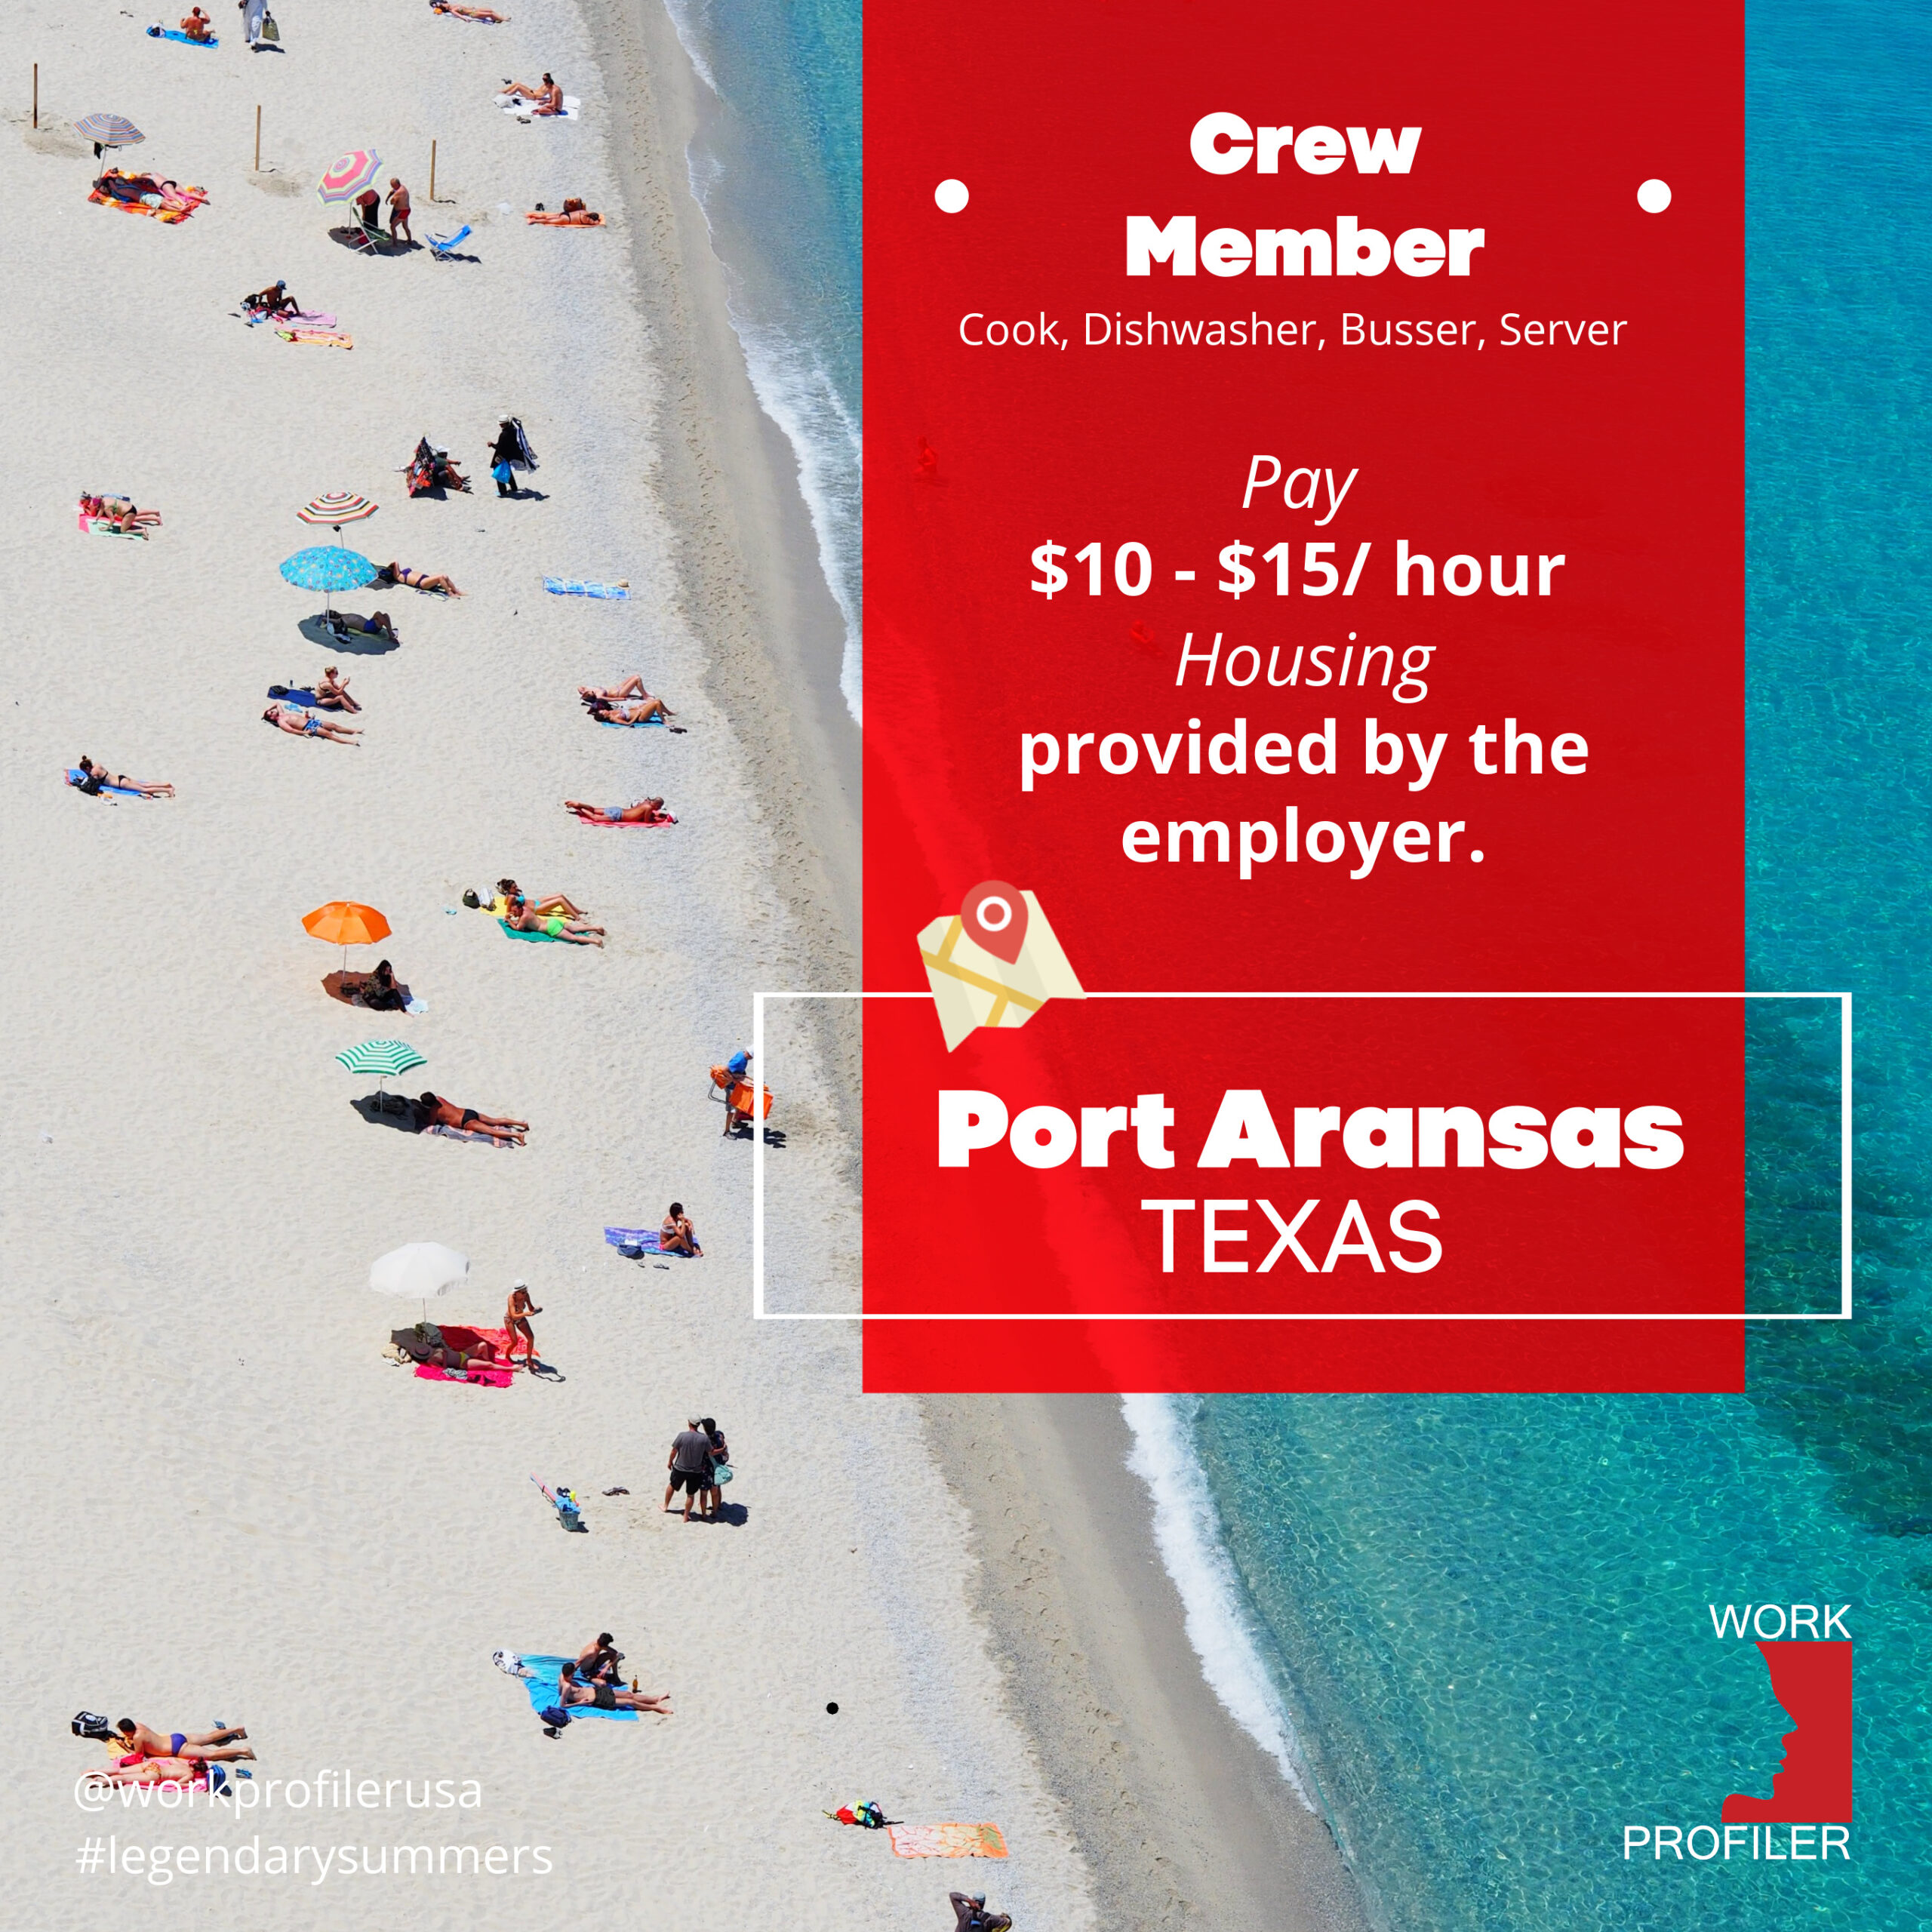 A job advertisement for crew member positions, including cook, dishwasher, busser, and server, in Port Aransas, Texas. The ad mentions pay of $10-$15 per hour and housing provided by the employer.